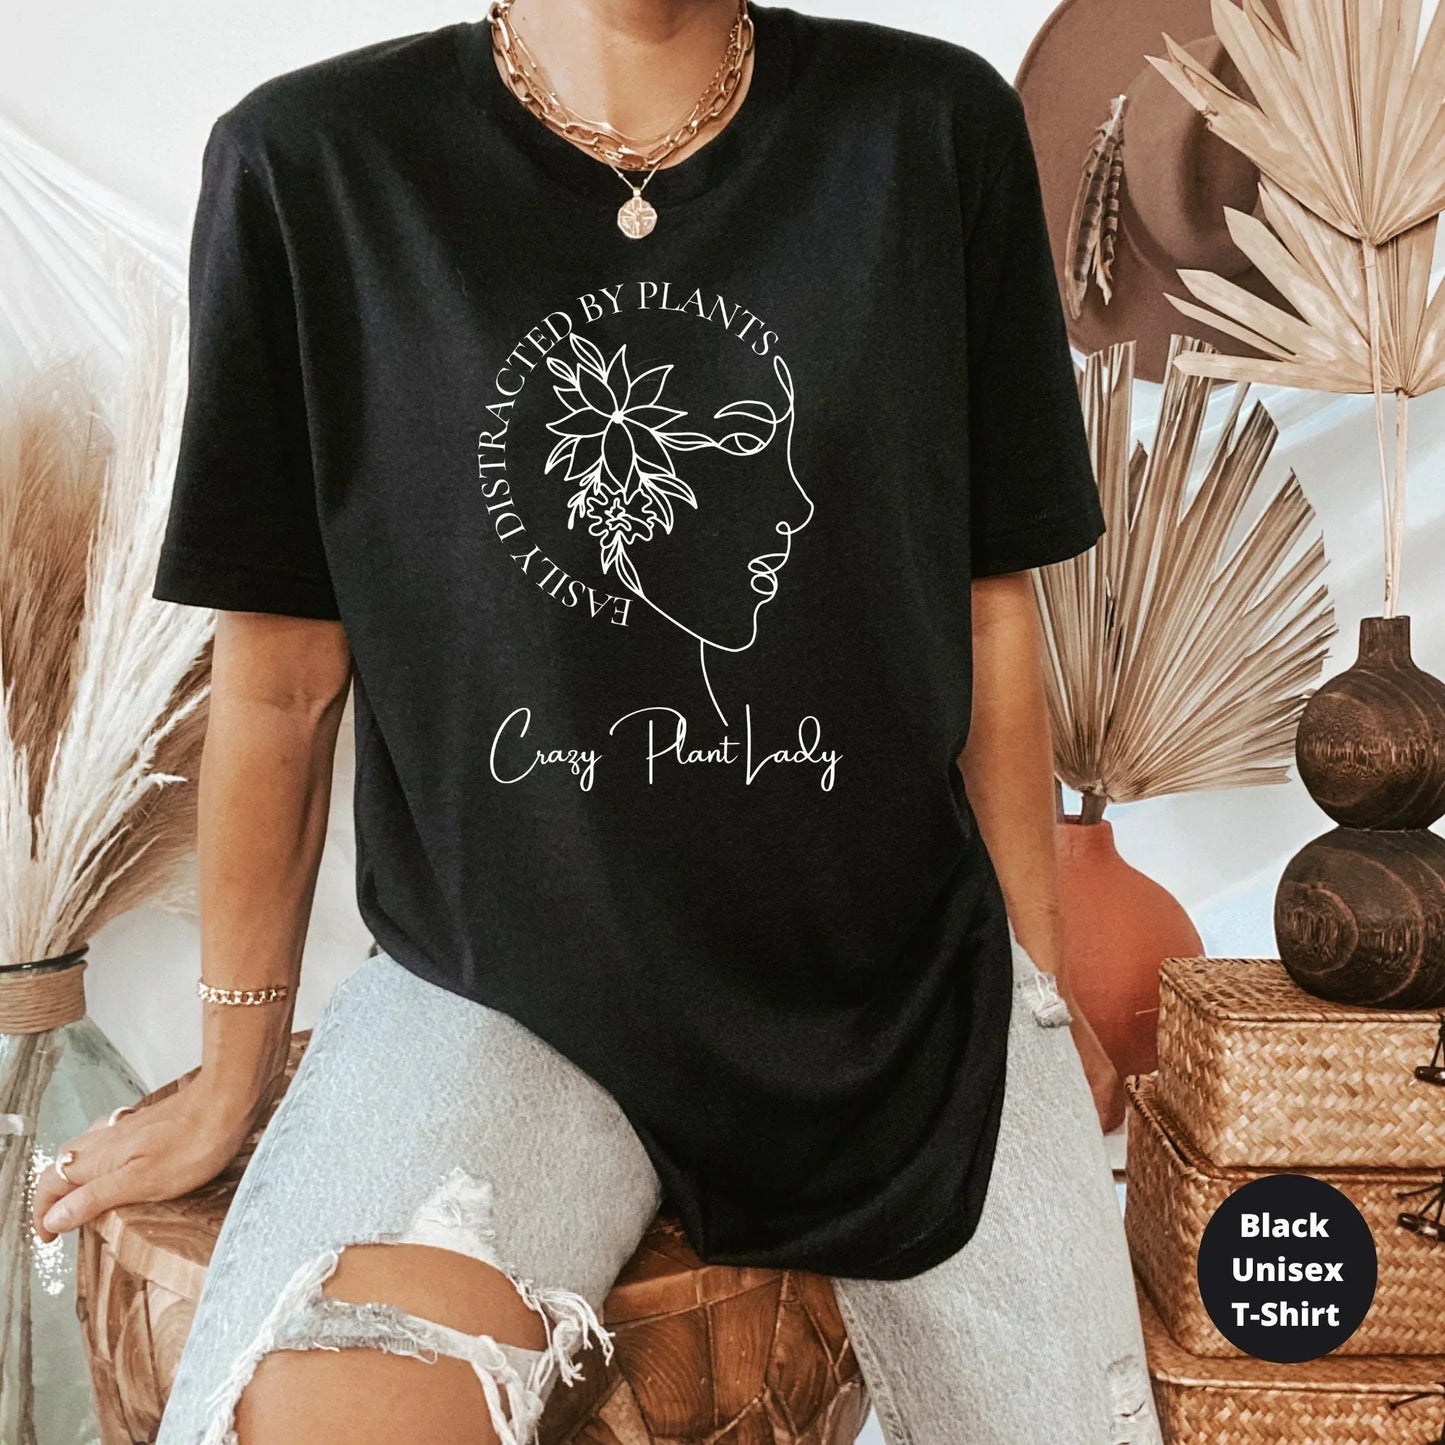 Crazy Plant Lady - Easily Distracted by plants - Plant Mom - Plant Lady Shirt - Plant Mom Gift - Vegan Shirt - Plant Lover Tee - Plant Based HMDesignStudioUS